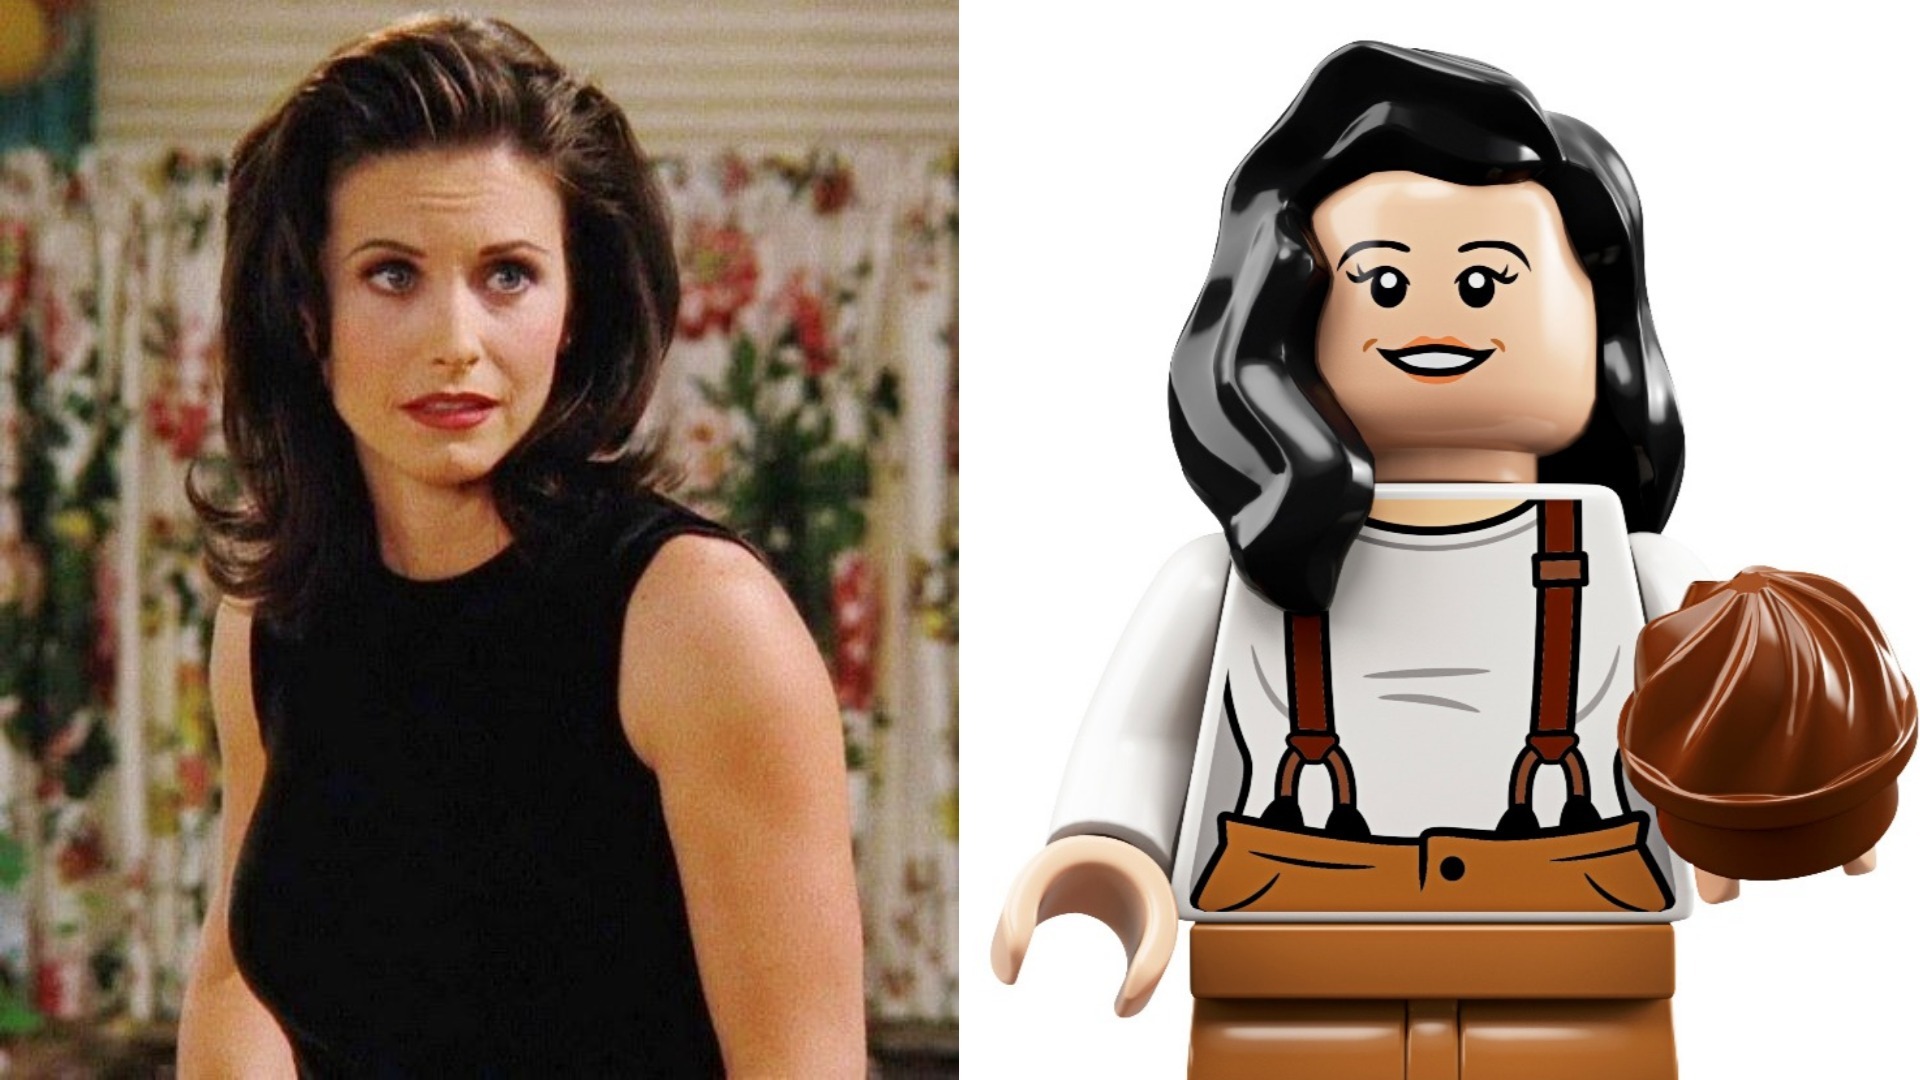 LEGO 'Friends': Take the Central Perk Gang Home With You